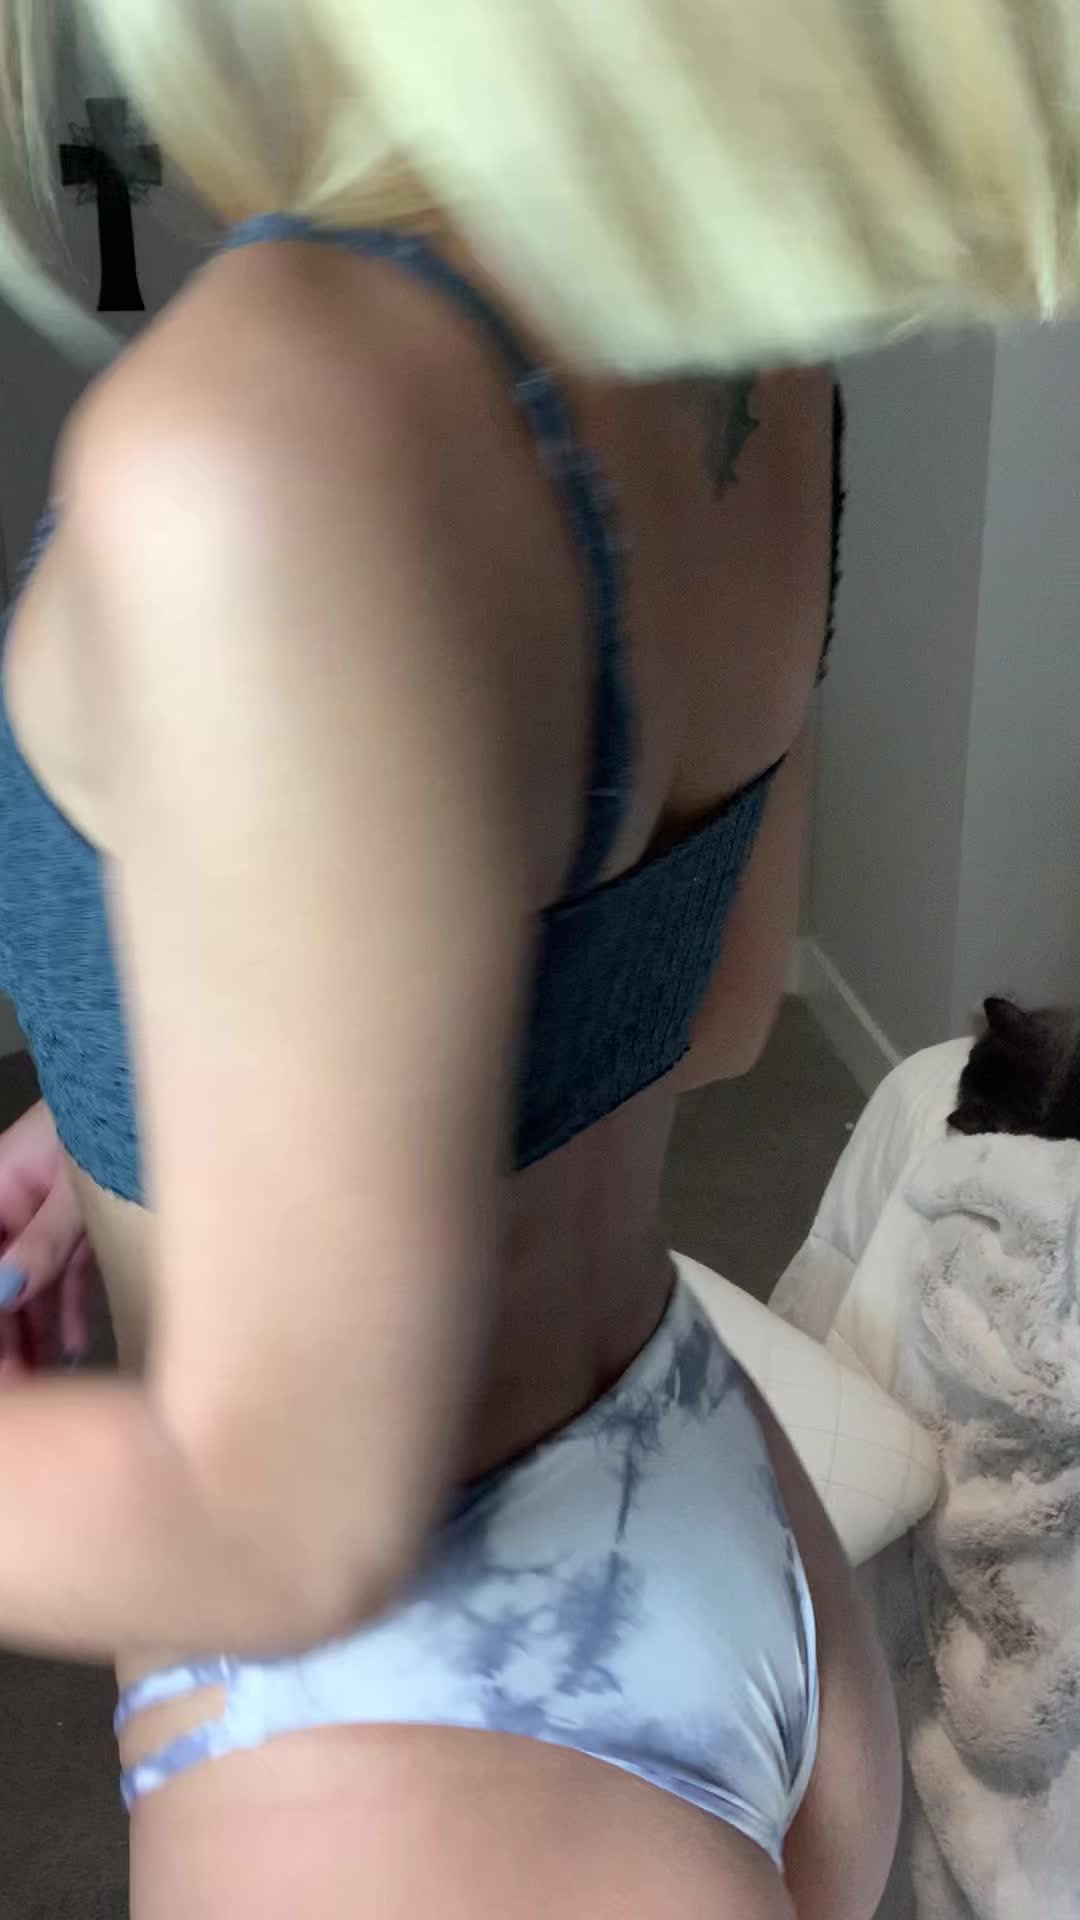 Video post by Mia